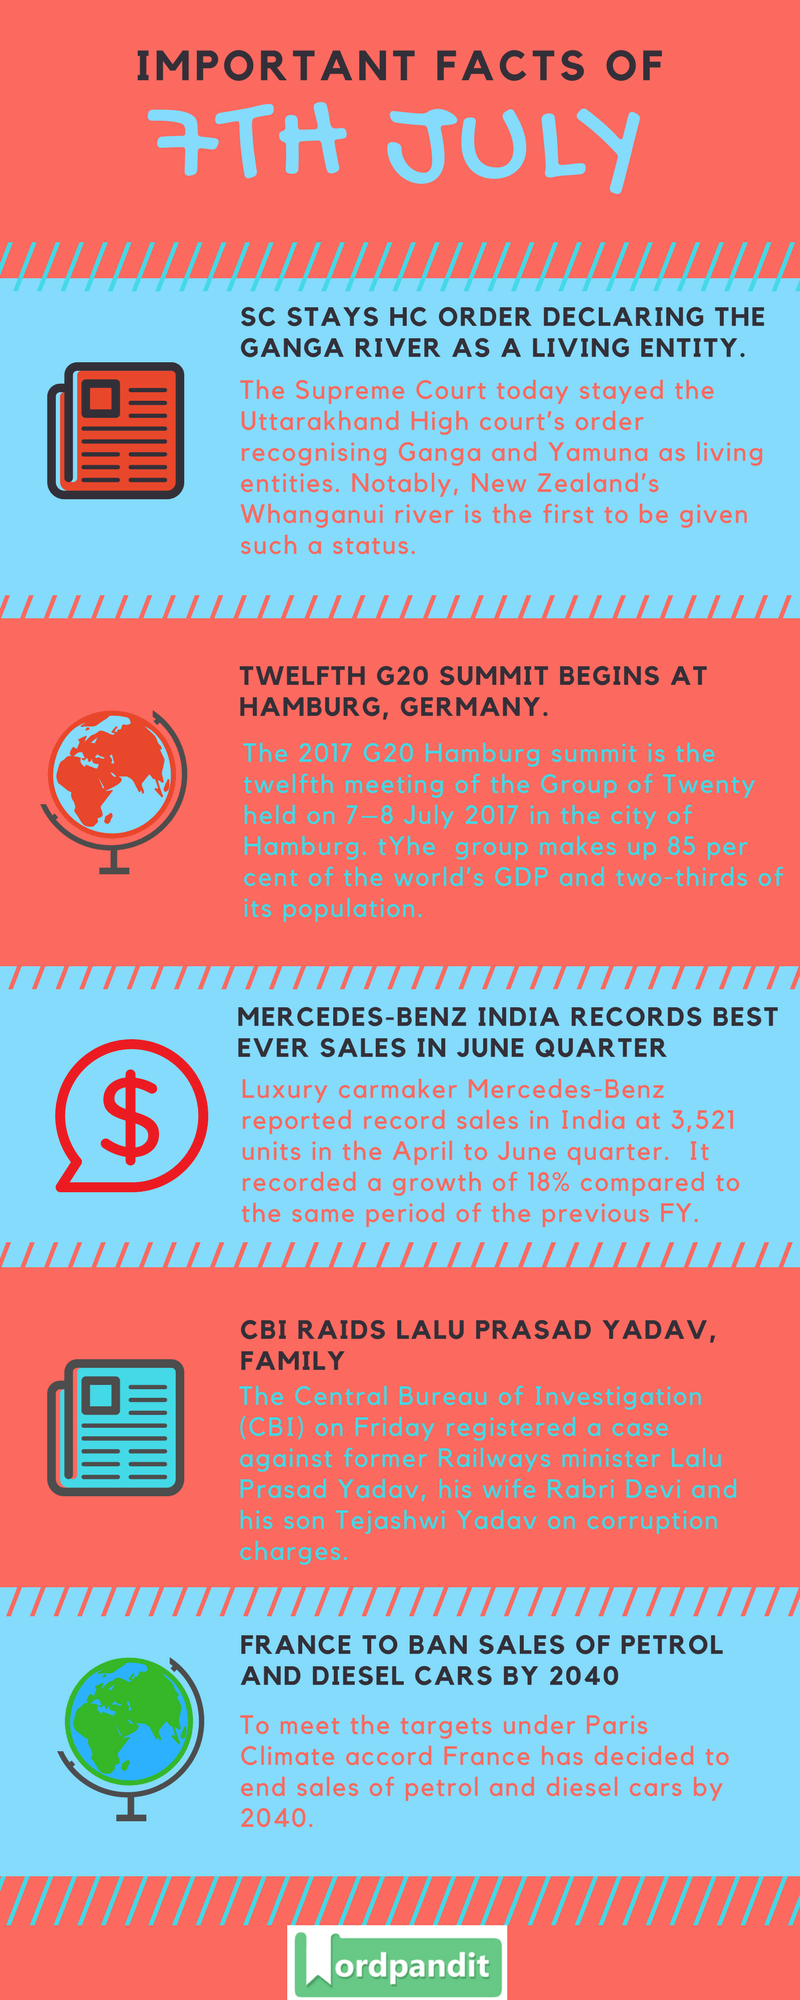 Daily-Current-Affairs-7-july-2017-Current-Affairs-Quiz-july-7-2017-Current-Affairs-Infographic